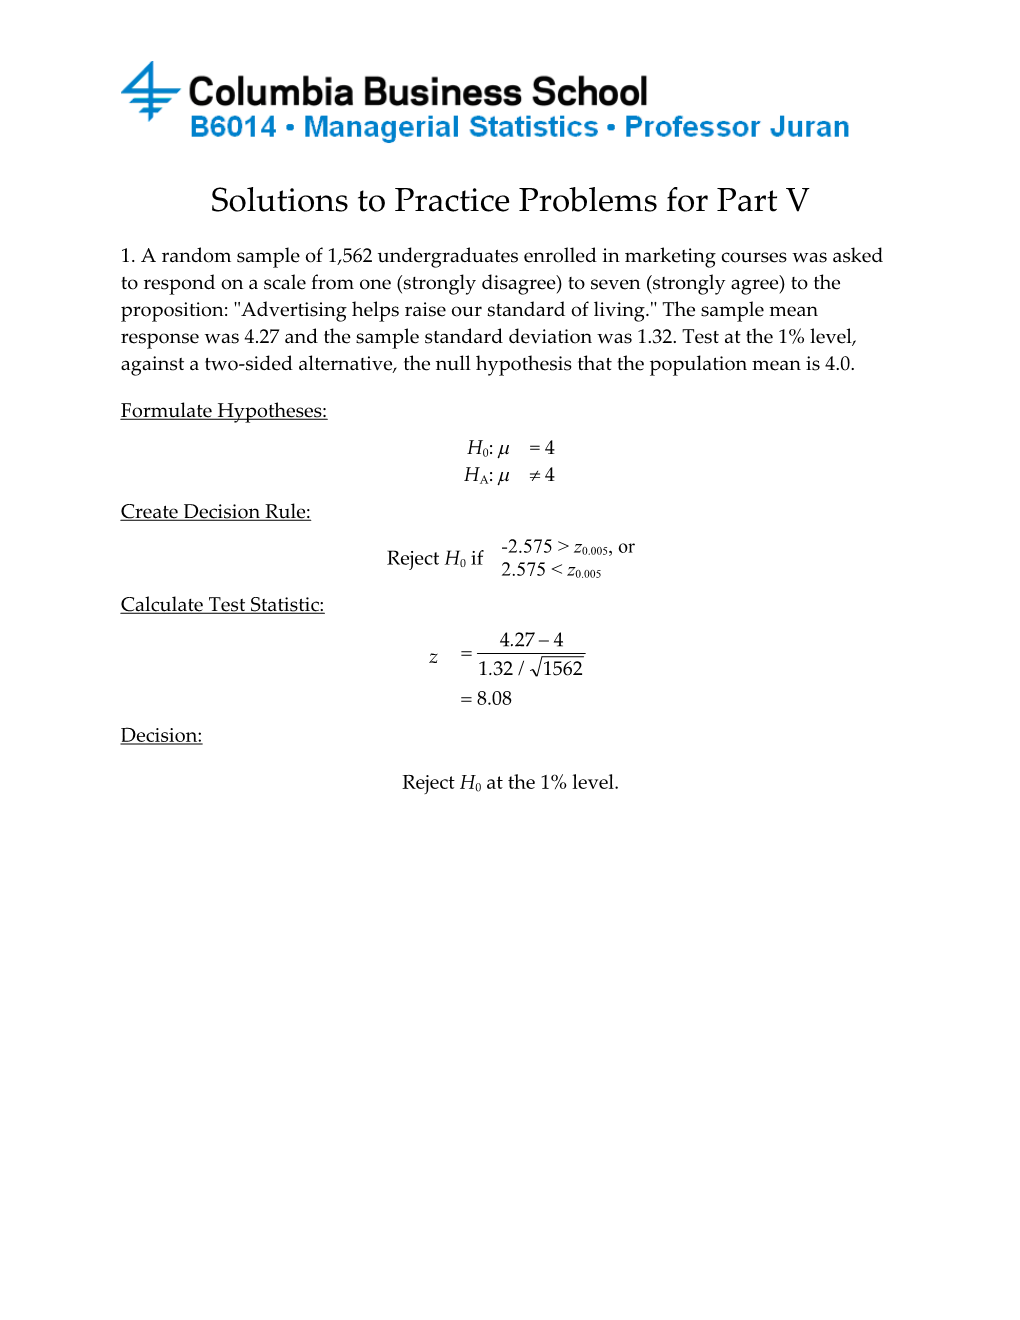 Solutions to Practice Problems for Part V